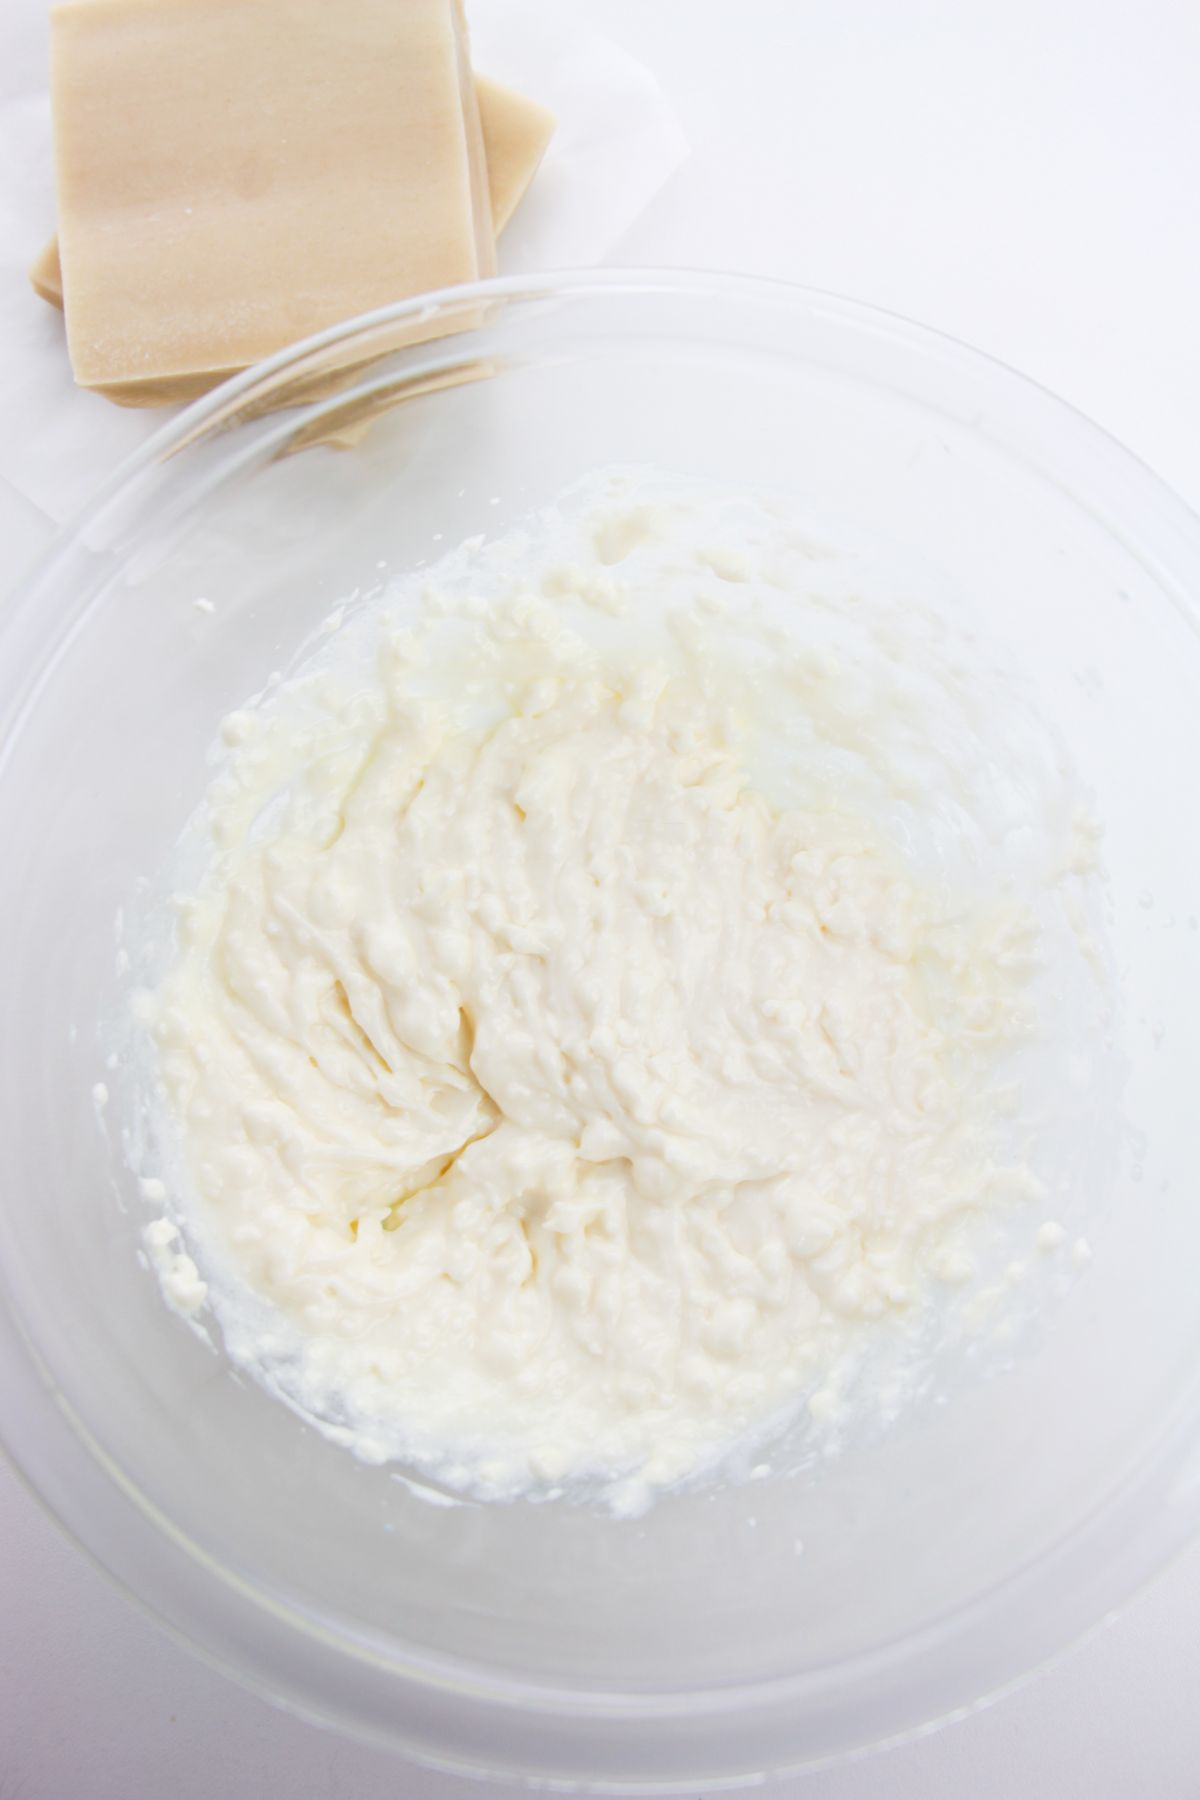 cream cheese, powdered icing sugar, vanilla extract and Greek yogurt or sour cream in a large bowl.